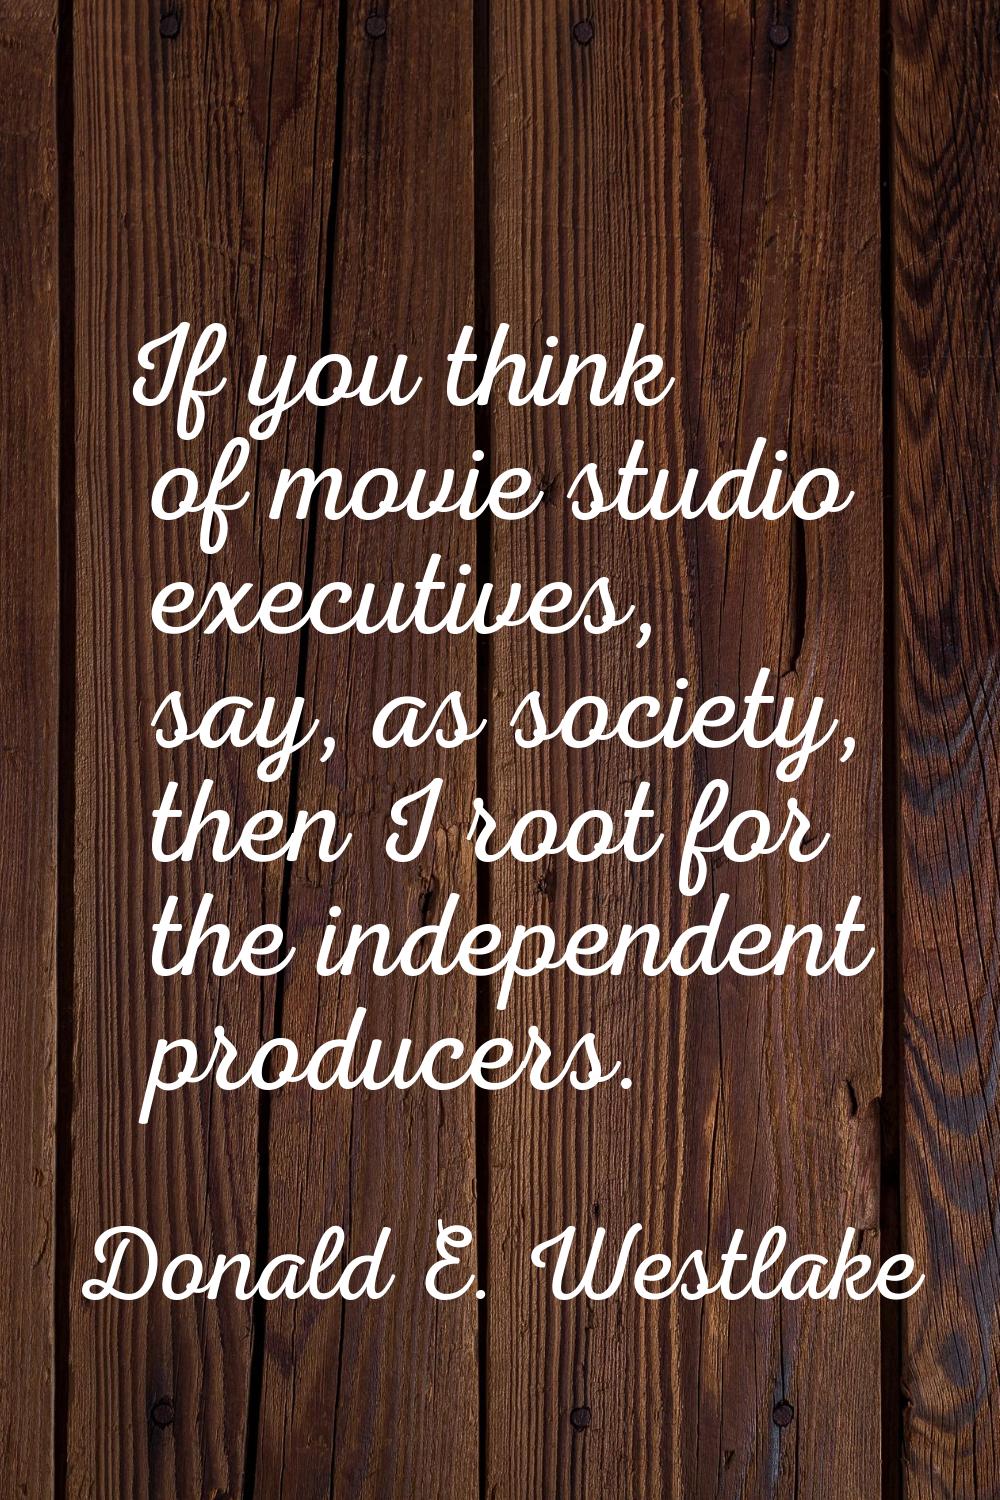 If you think of movie studio executives, say, as society, then I root for the independent producers